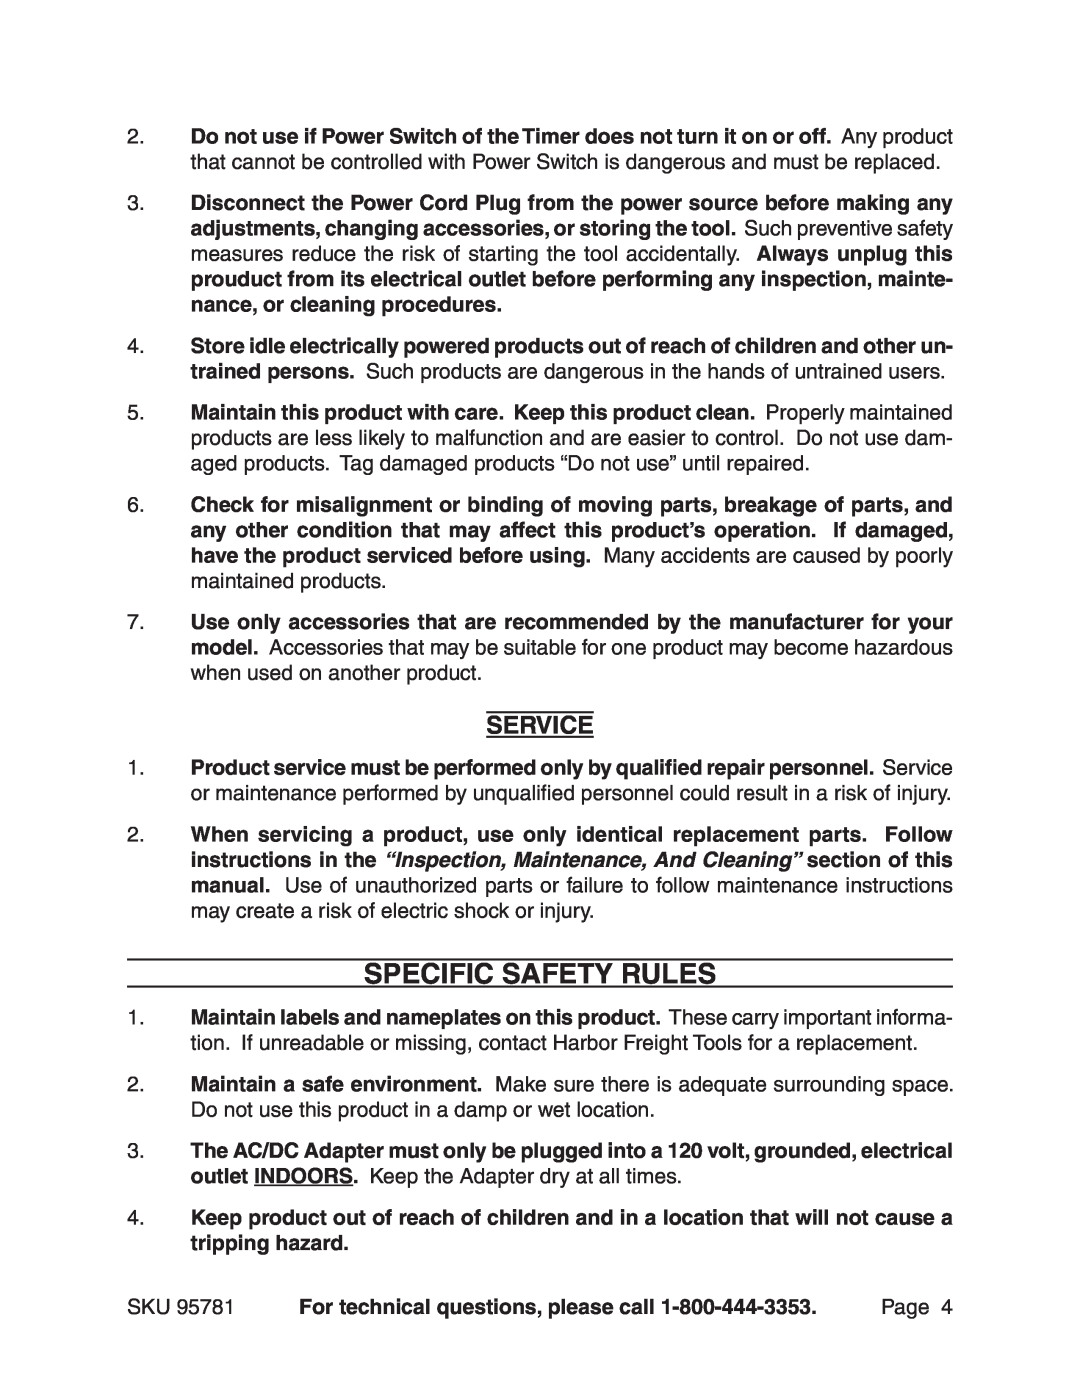 Harbor Freight Tools 95781 manual Specific Safety Rules, Service, For technical questions, please call 